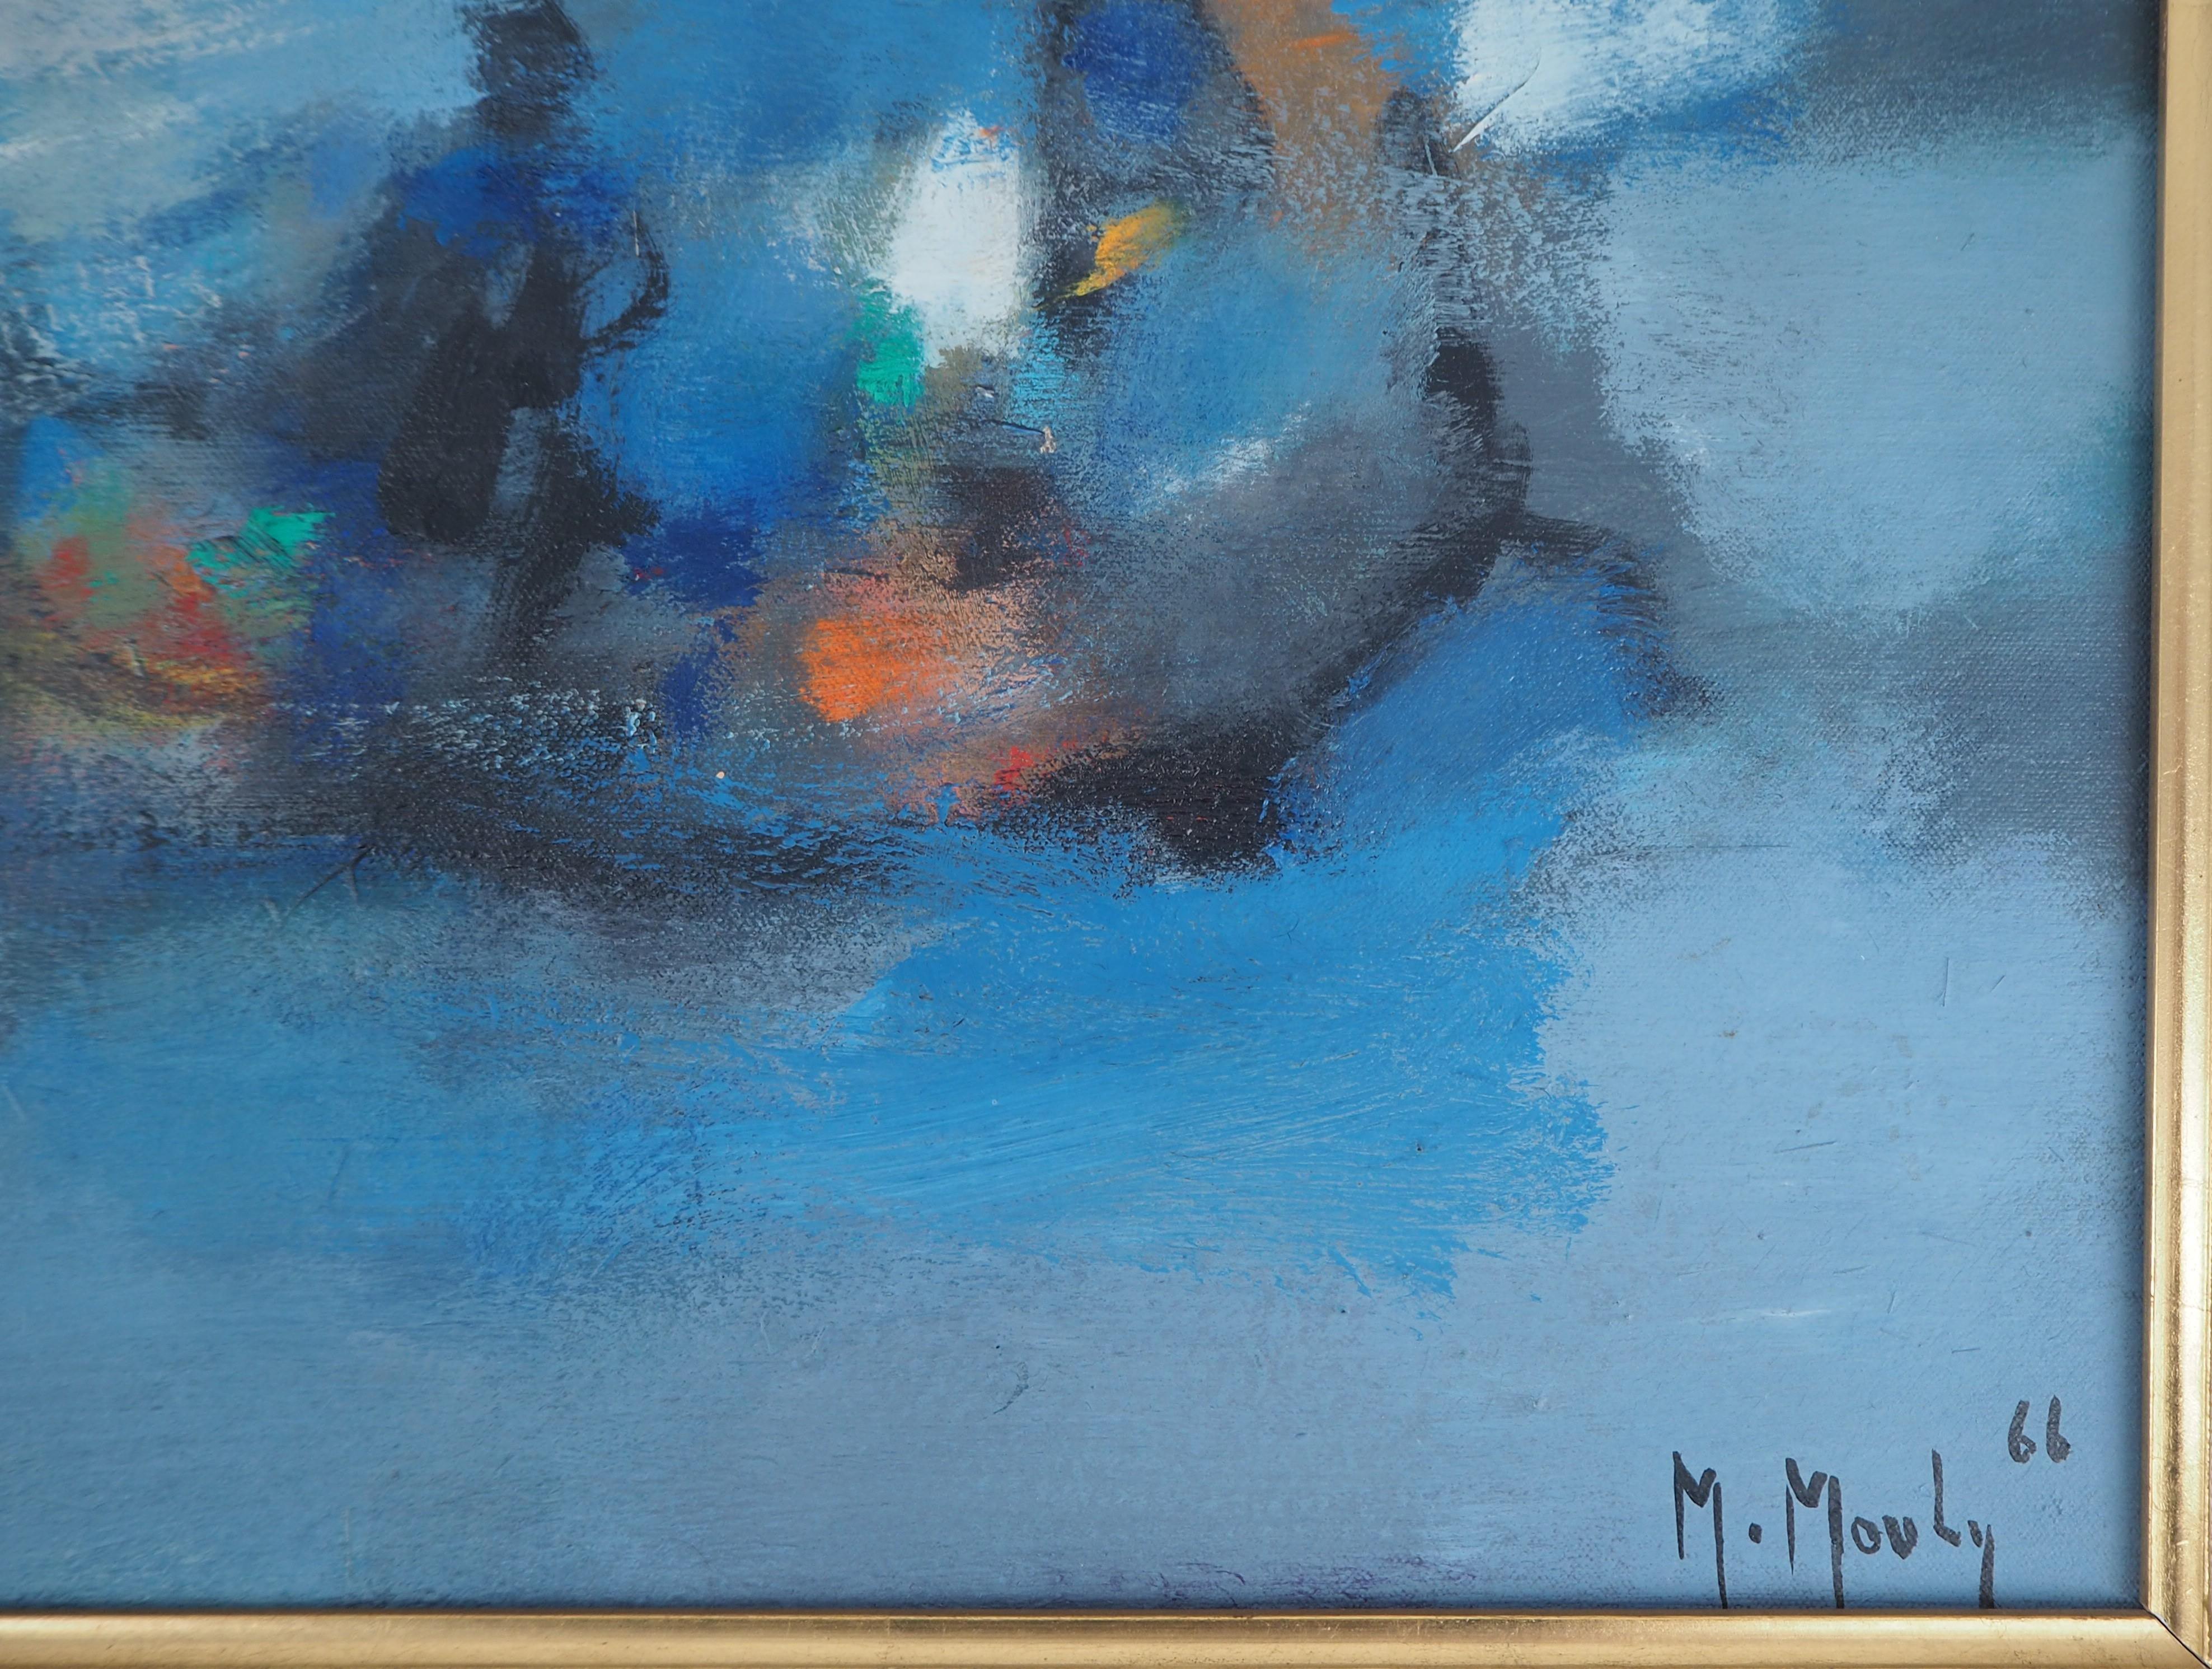 Boats : The Blue Sails - Original oil painting on canvas, Handsigned - Painting by Marcel Mouly